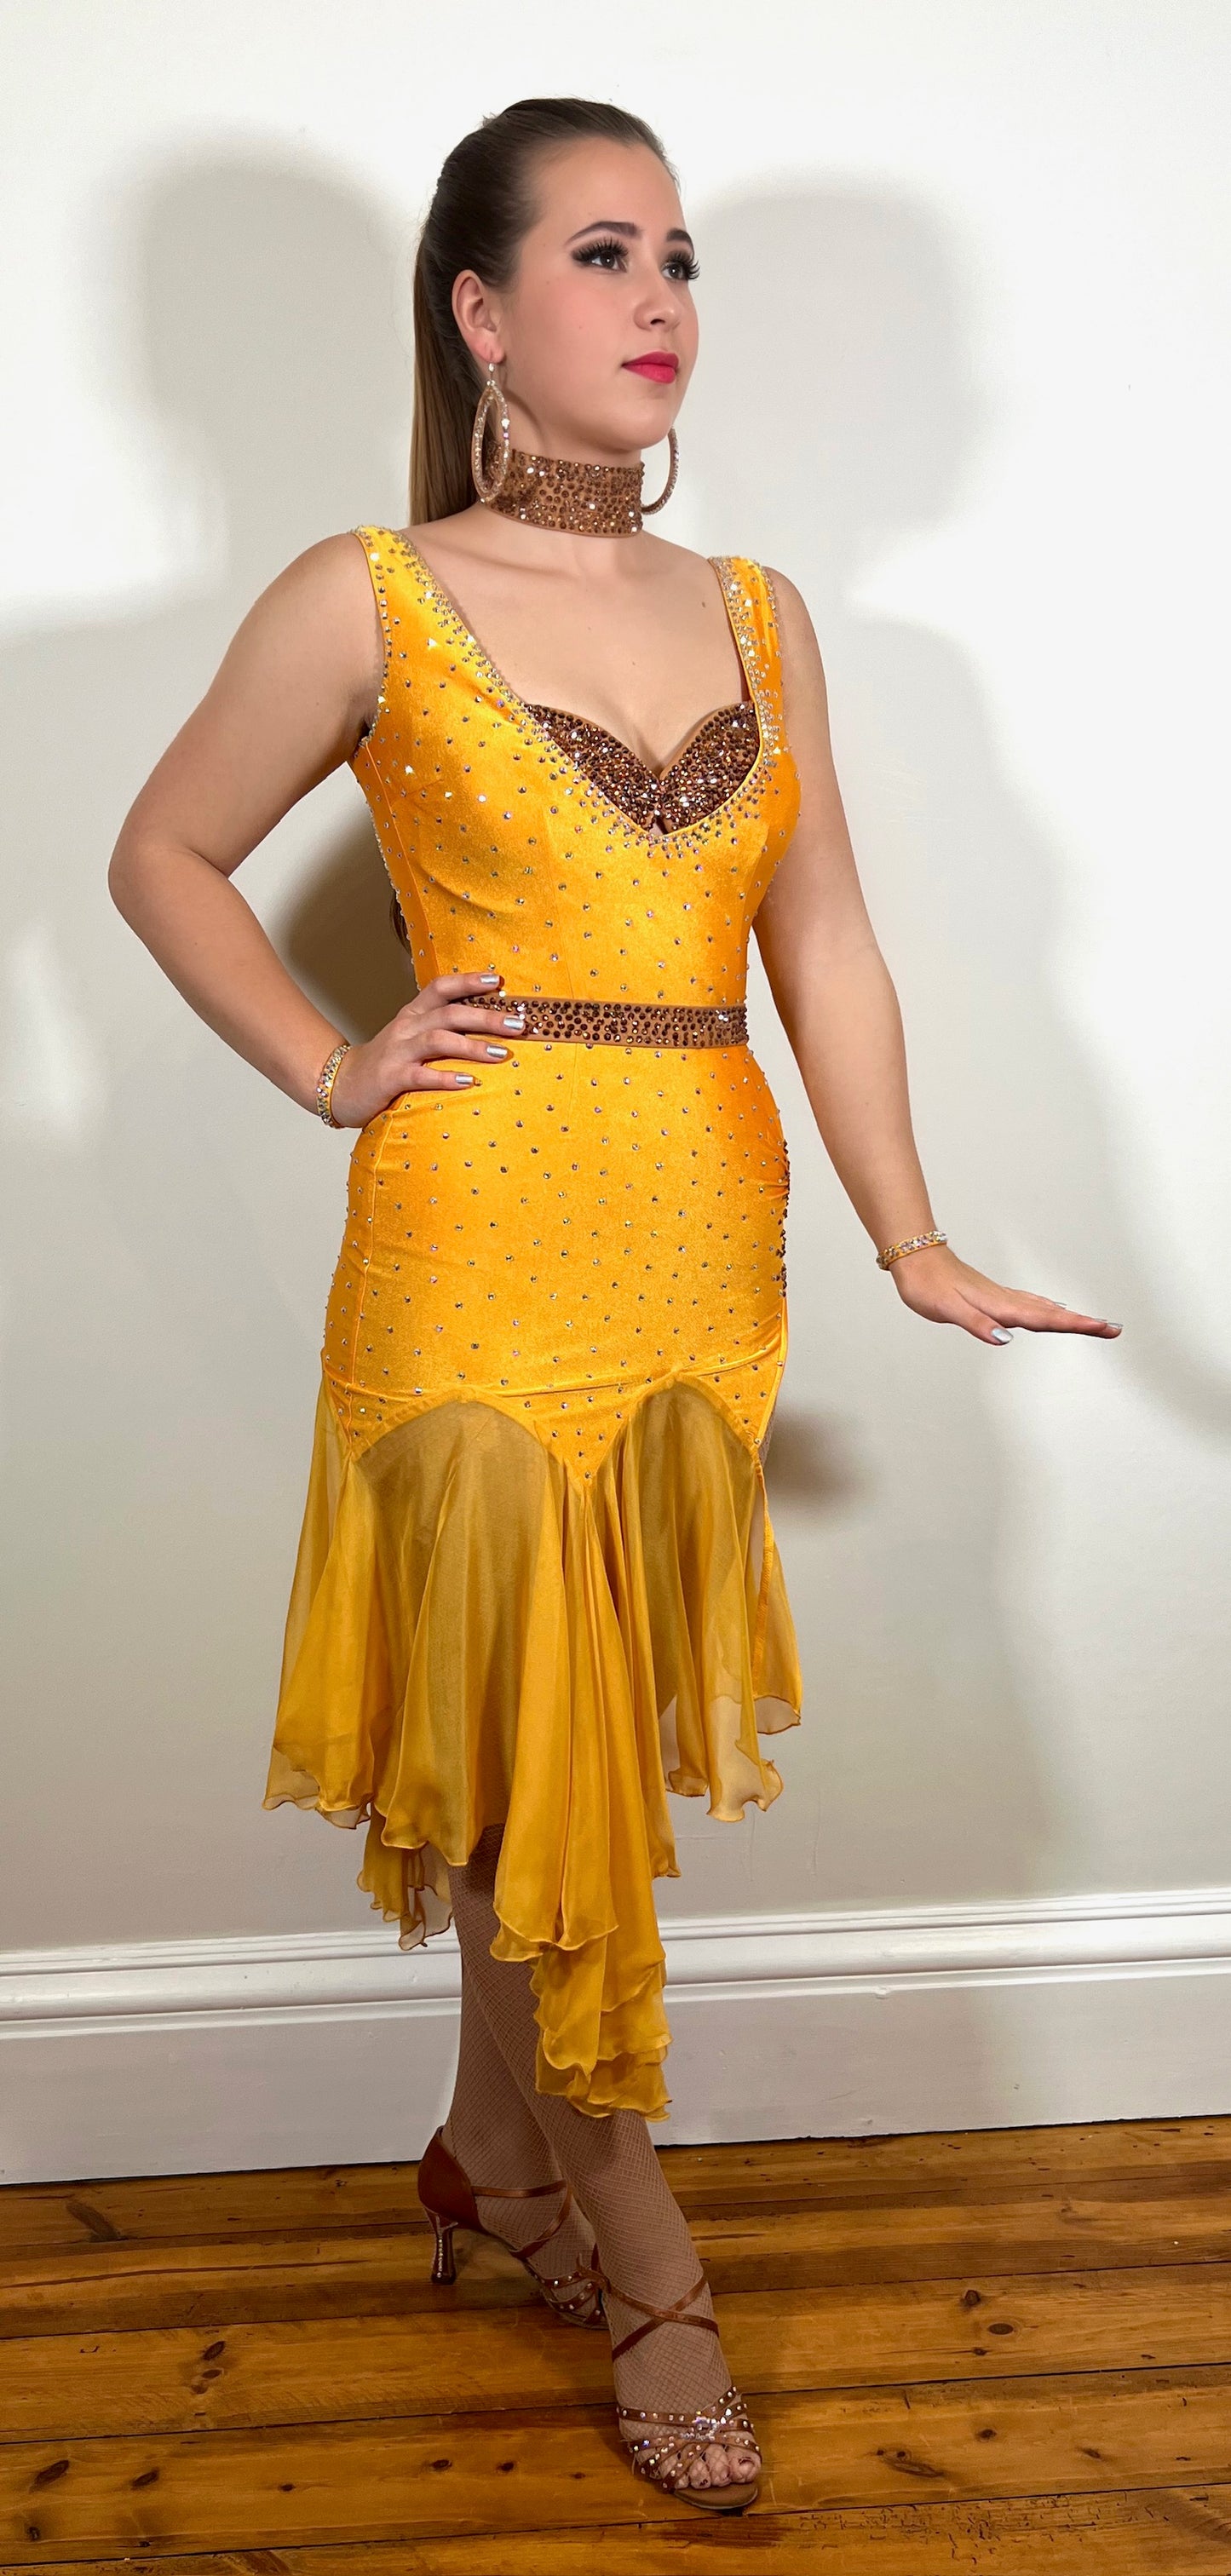 044 Bright Gold Latin Dress. Fully stoned bra feature with separate belt. Chiffon handkerchief skirts with ruching side detail. Stoned in topaz & sunshine yellow.